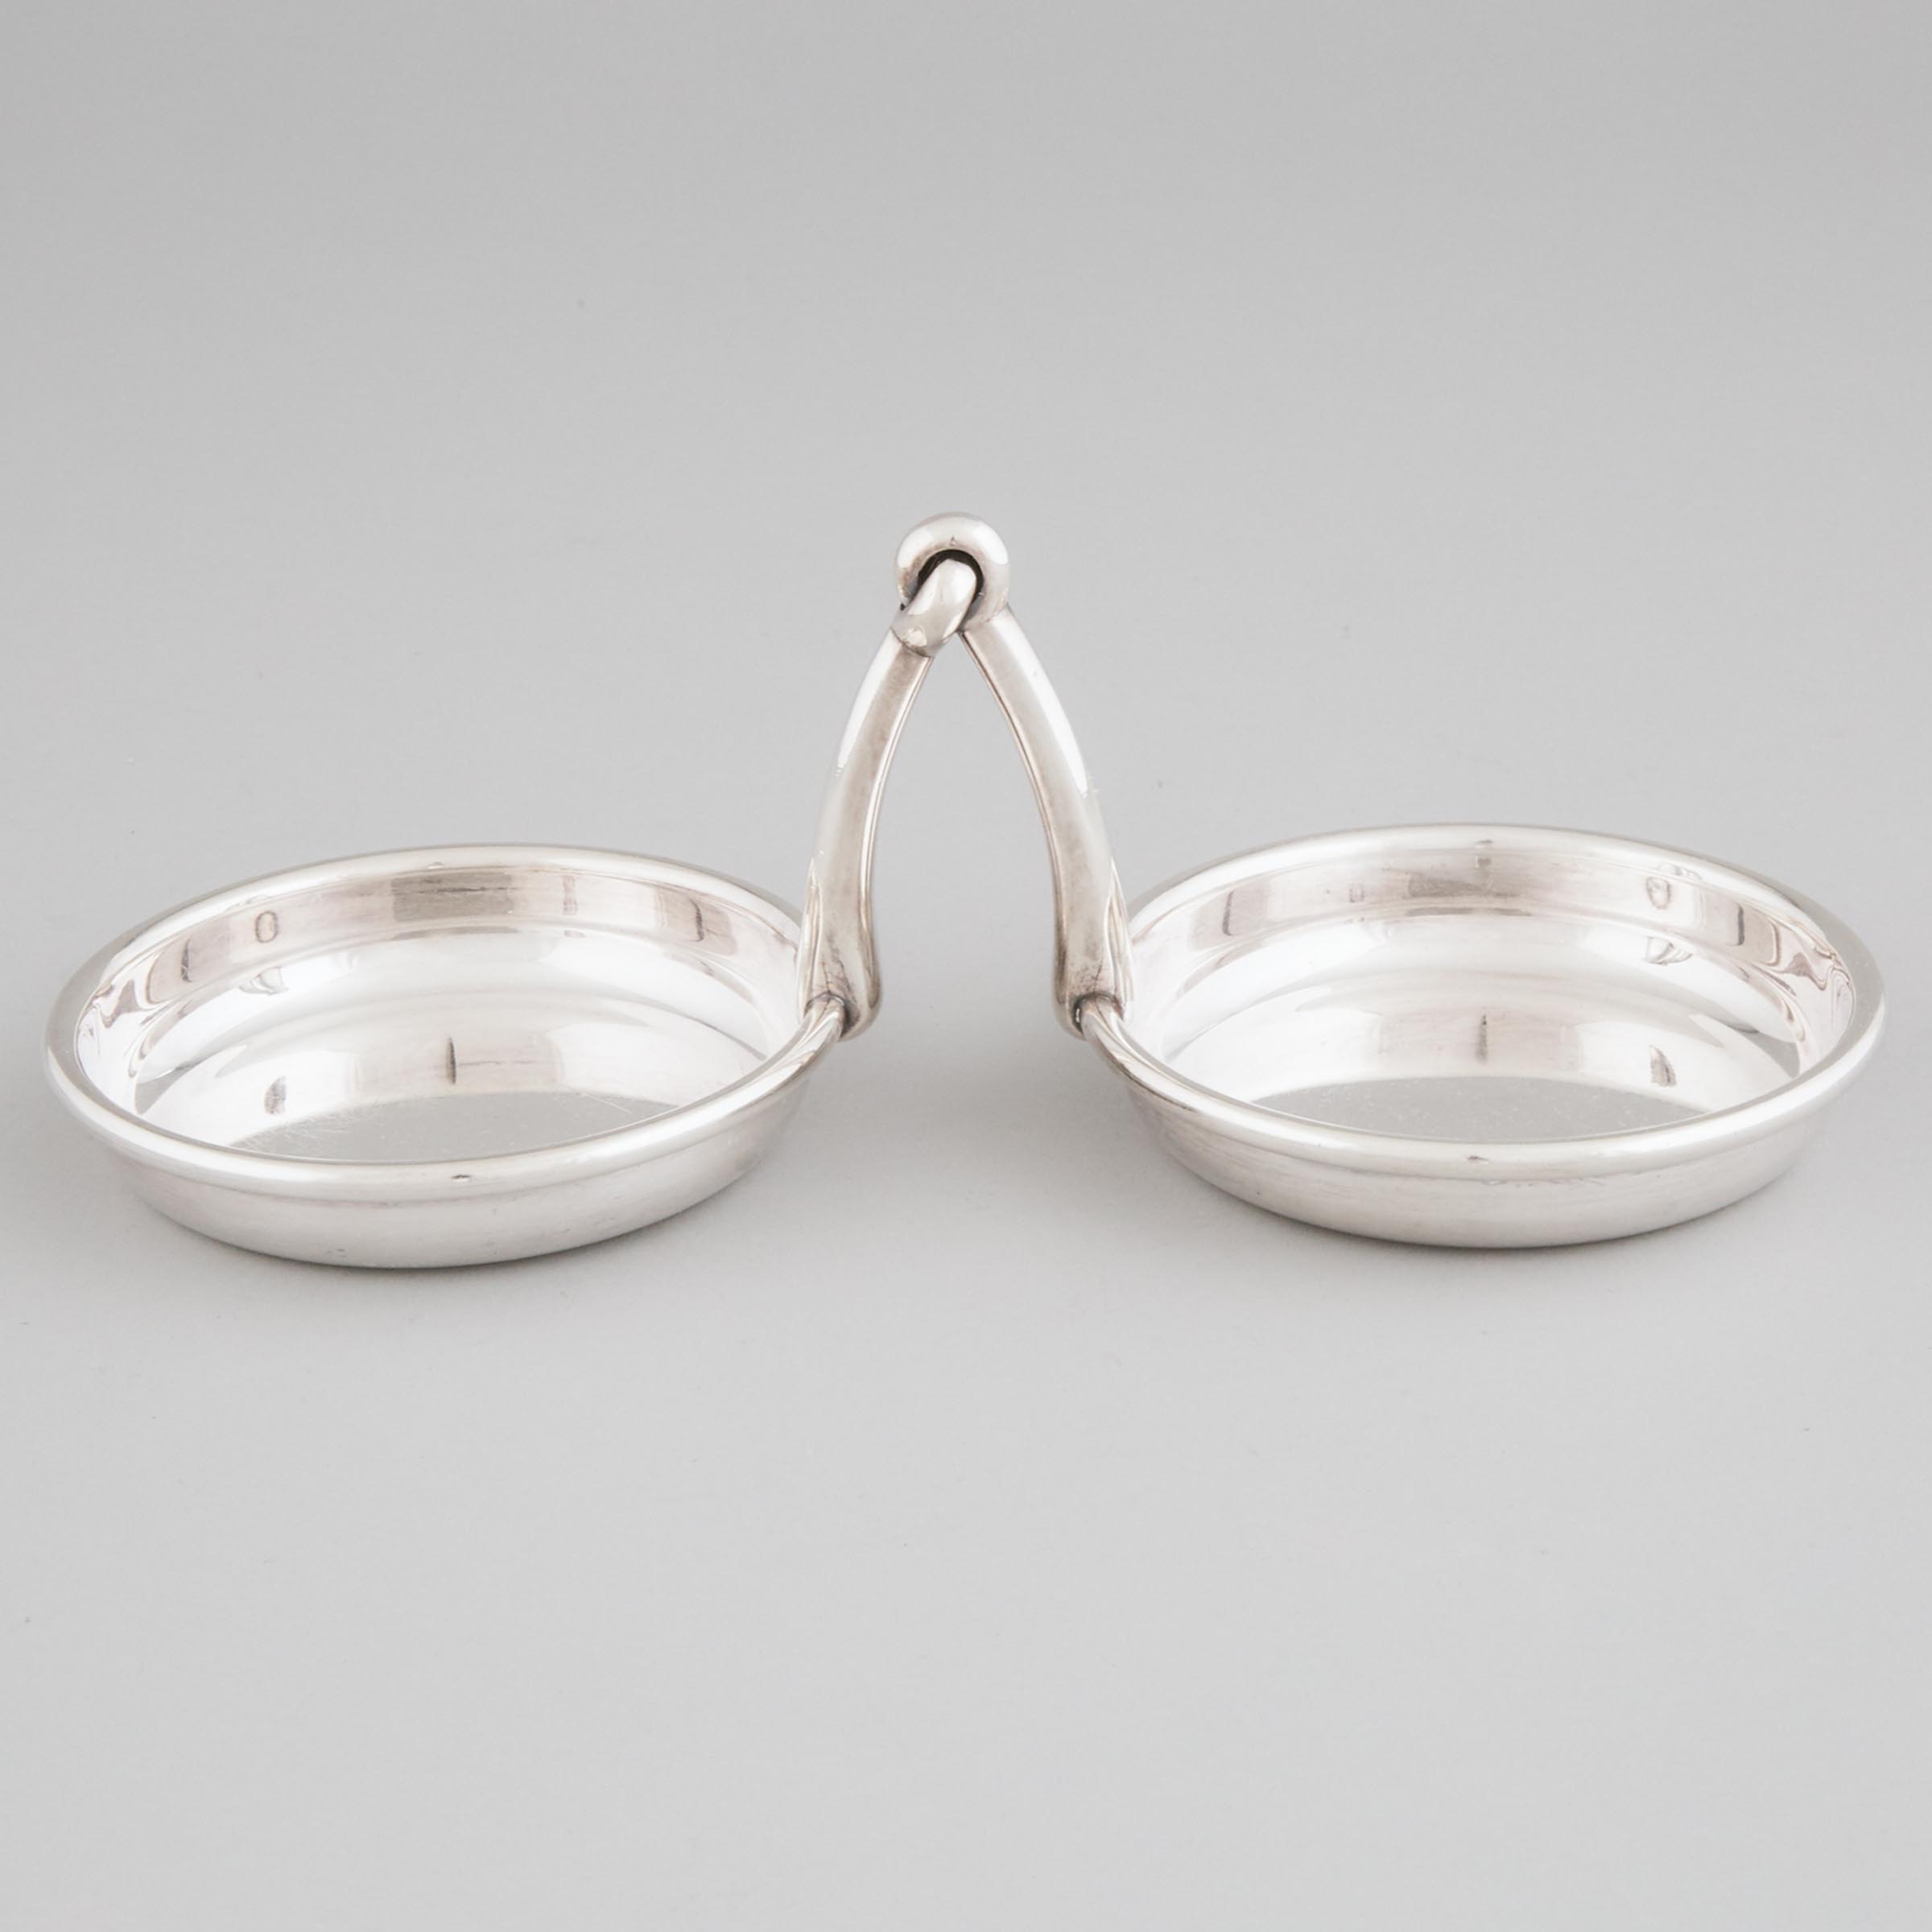 French Silver Plated Twin-Sectioned Serving Dish, Hermès, Paris, late 20th century